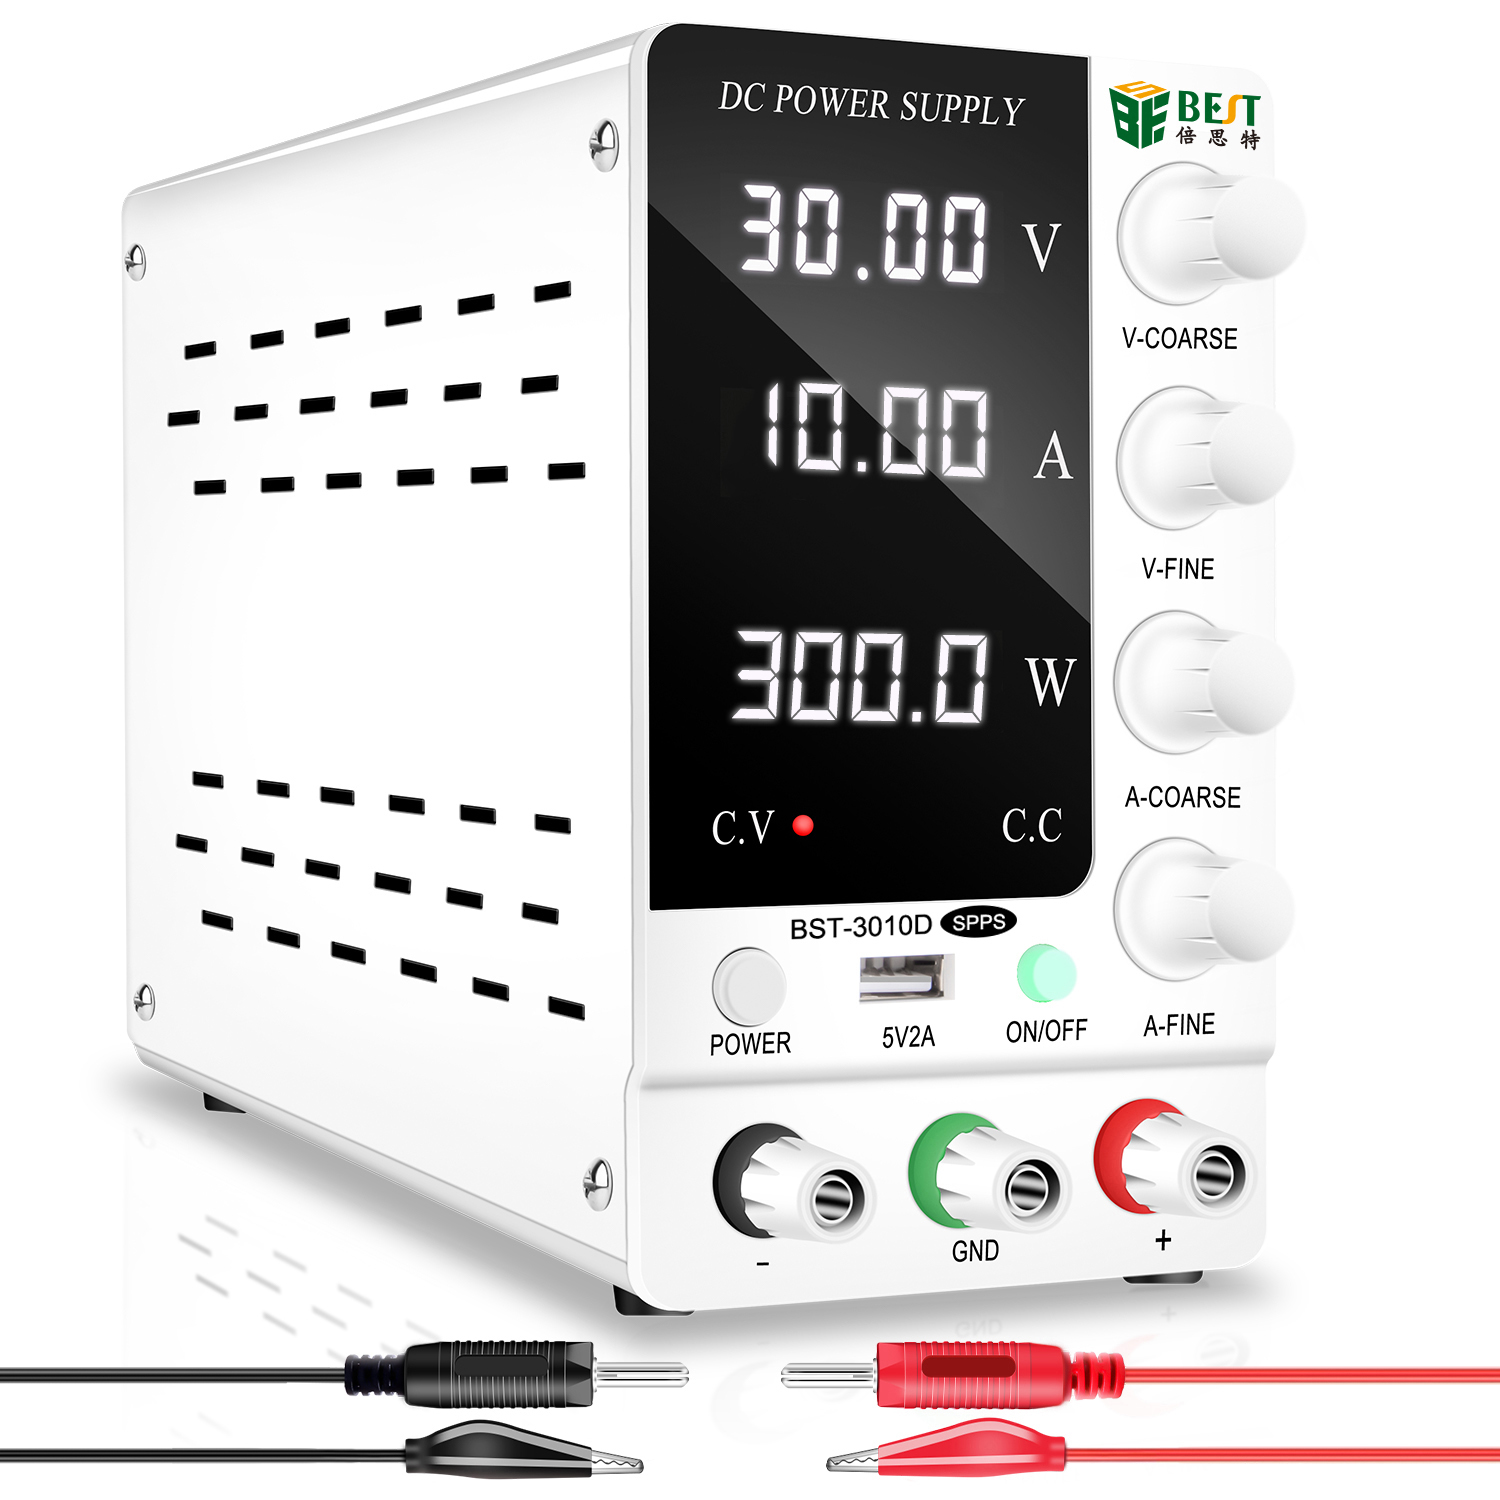 DC Power Supply Variable, 30V 10A Adjustable Switching Regulated DC Bench Power Supply with High Precision 4-Digits LED Display, 5V/2A USB Port, Coarse and Fine Adjustments, Best Tool BST-3010D